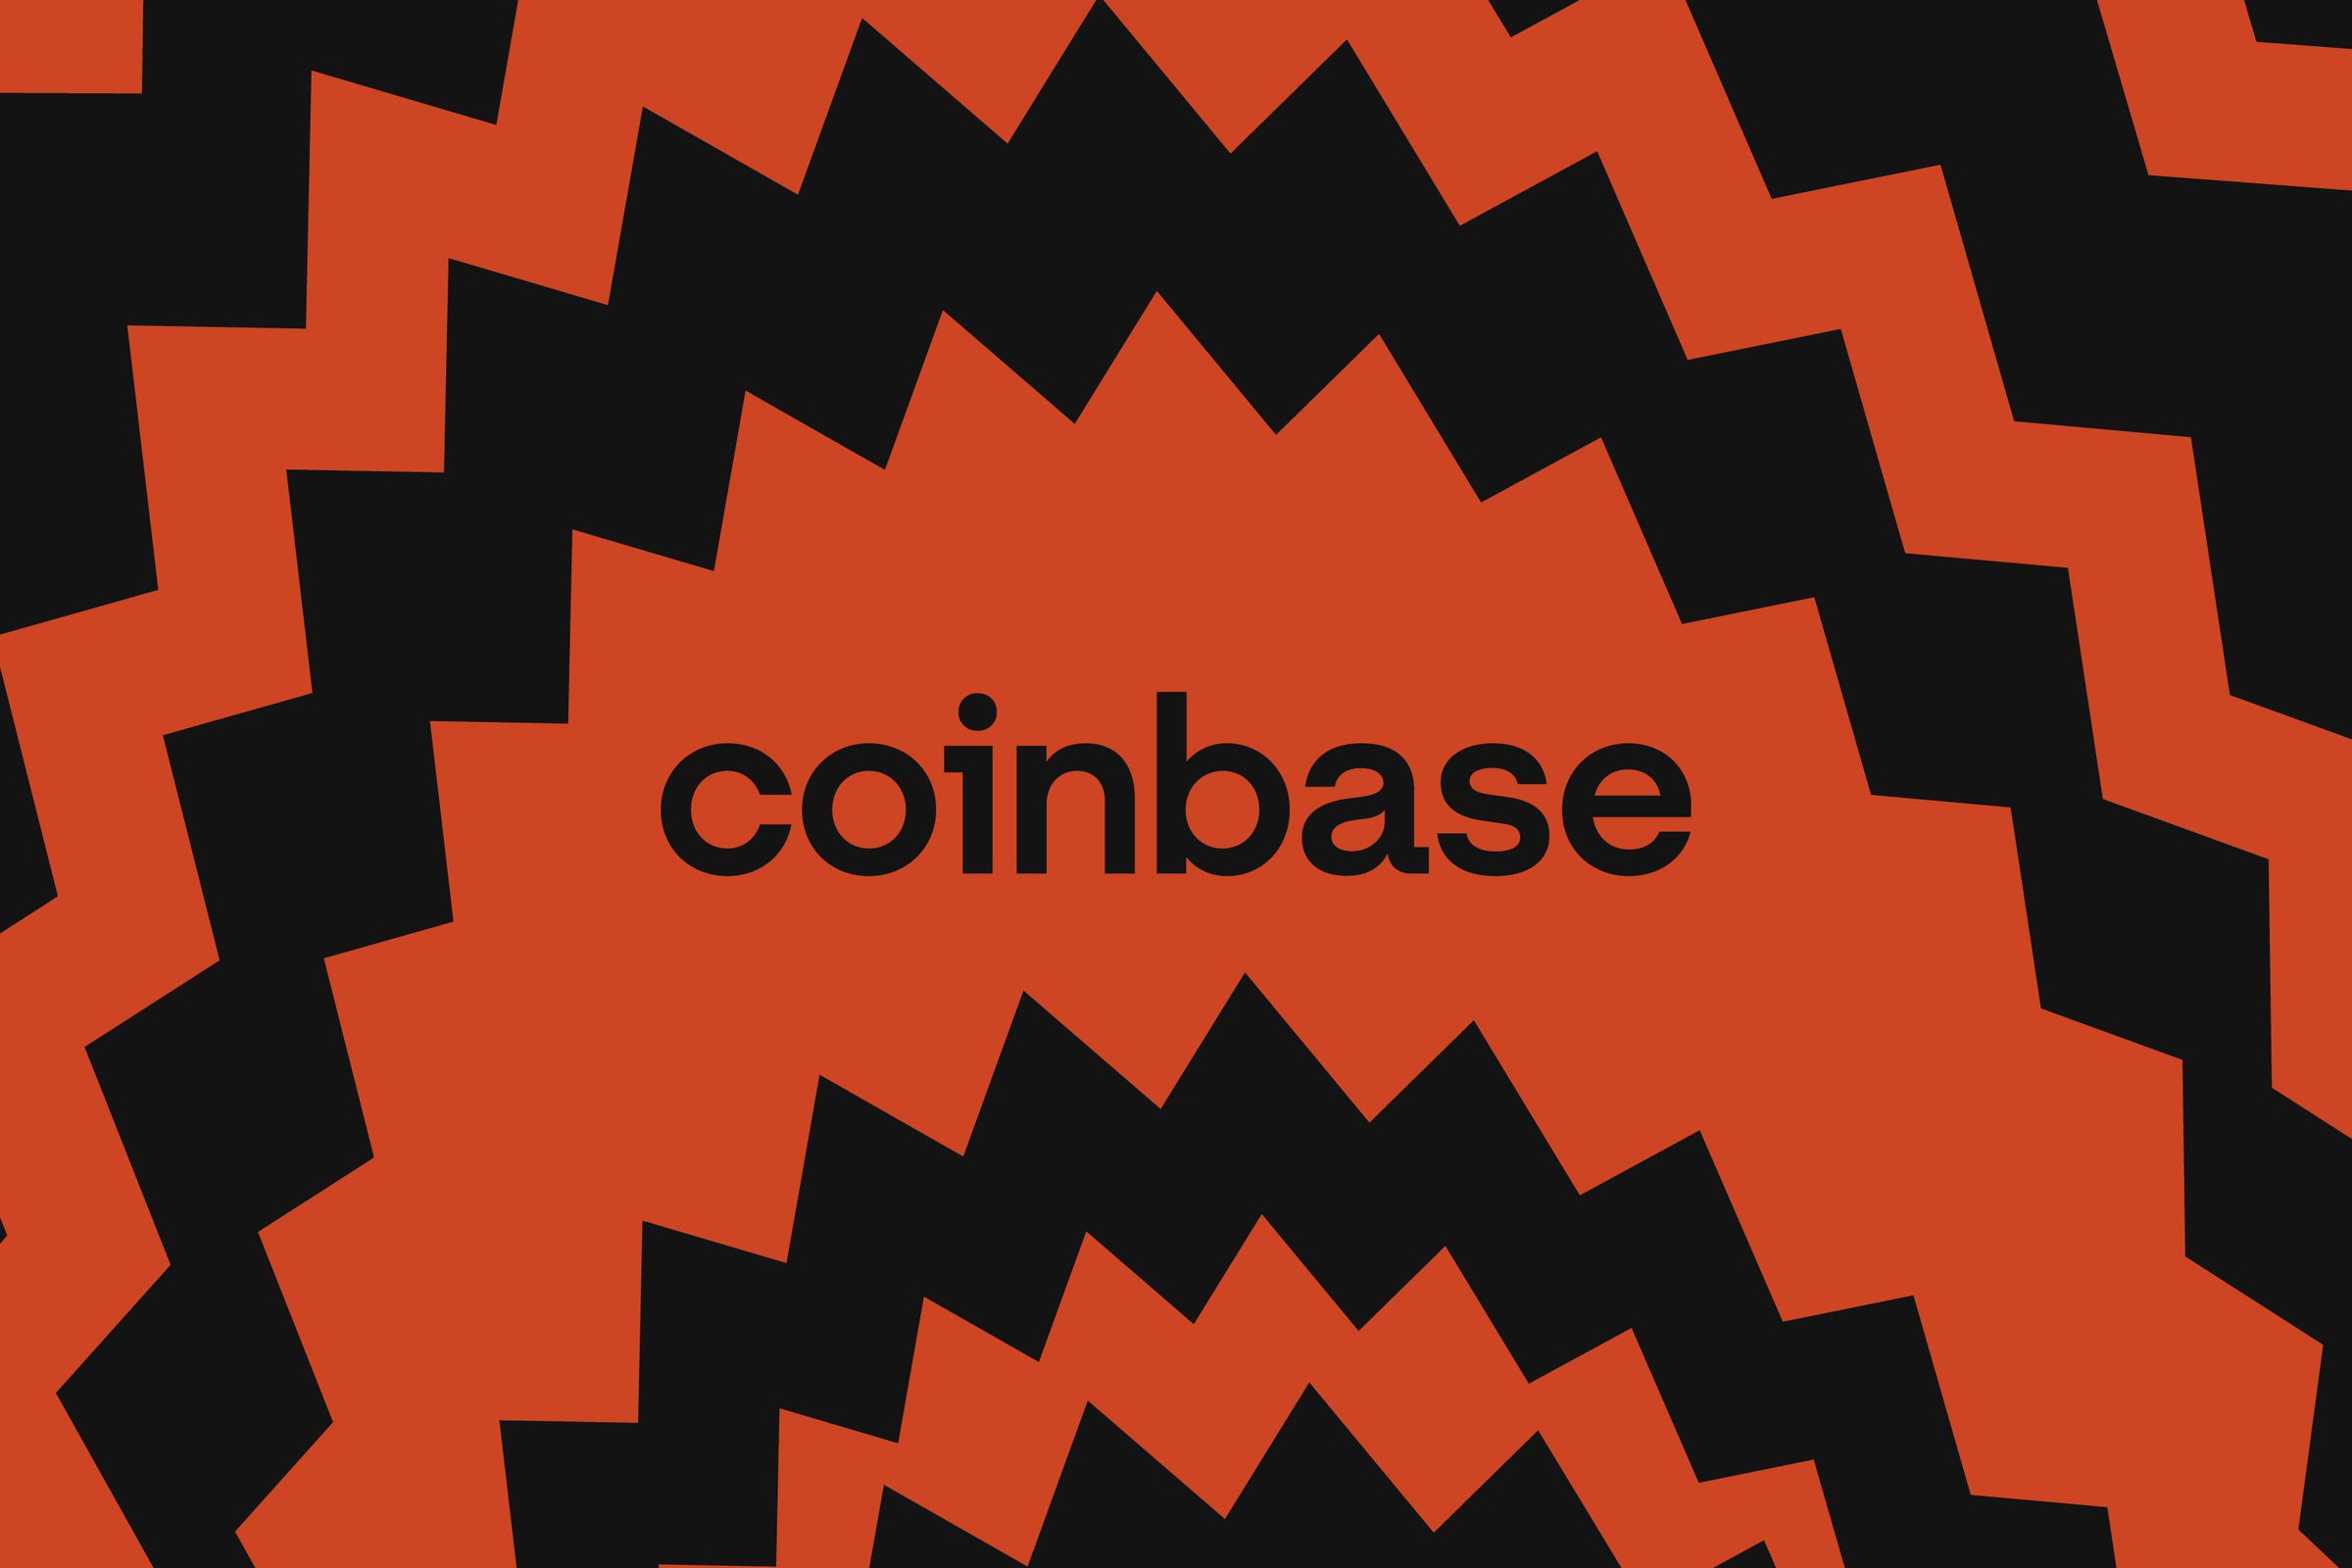 Illustration of the Coinbase wordmark on a black and red background.